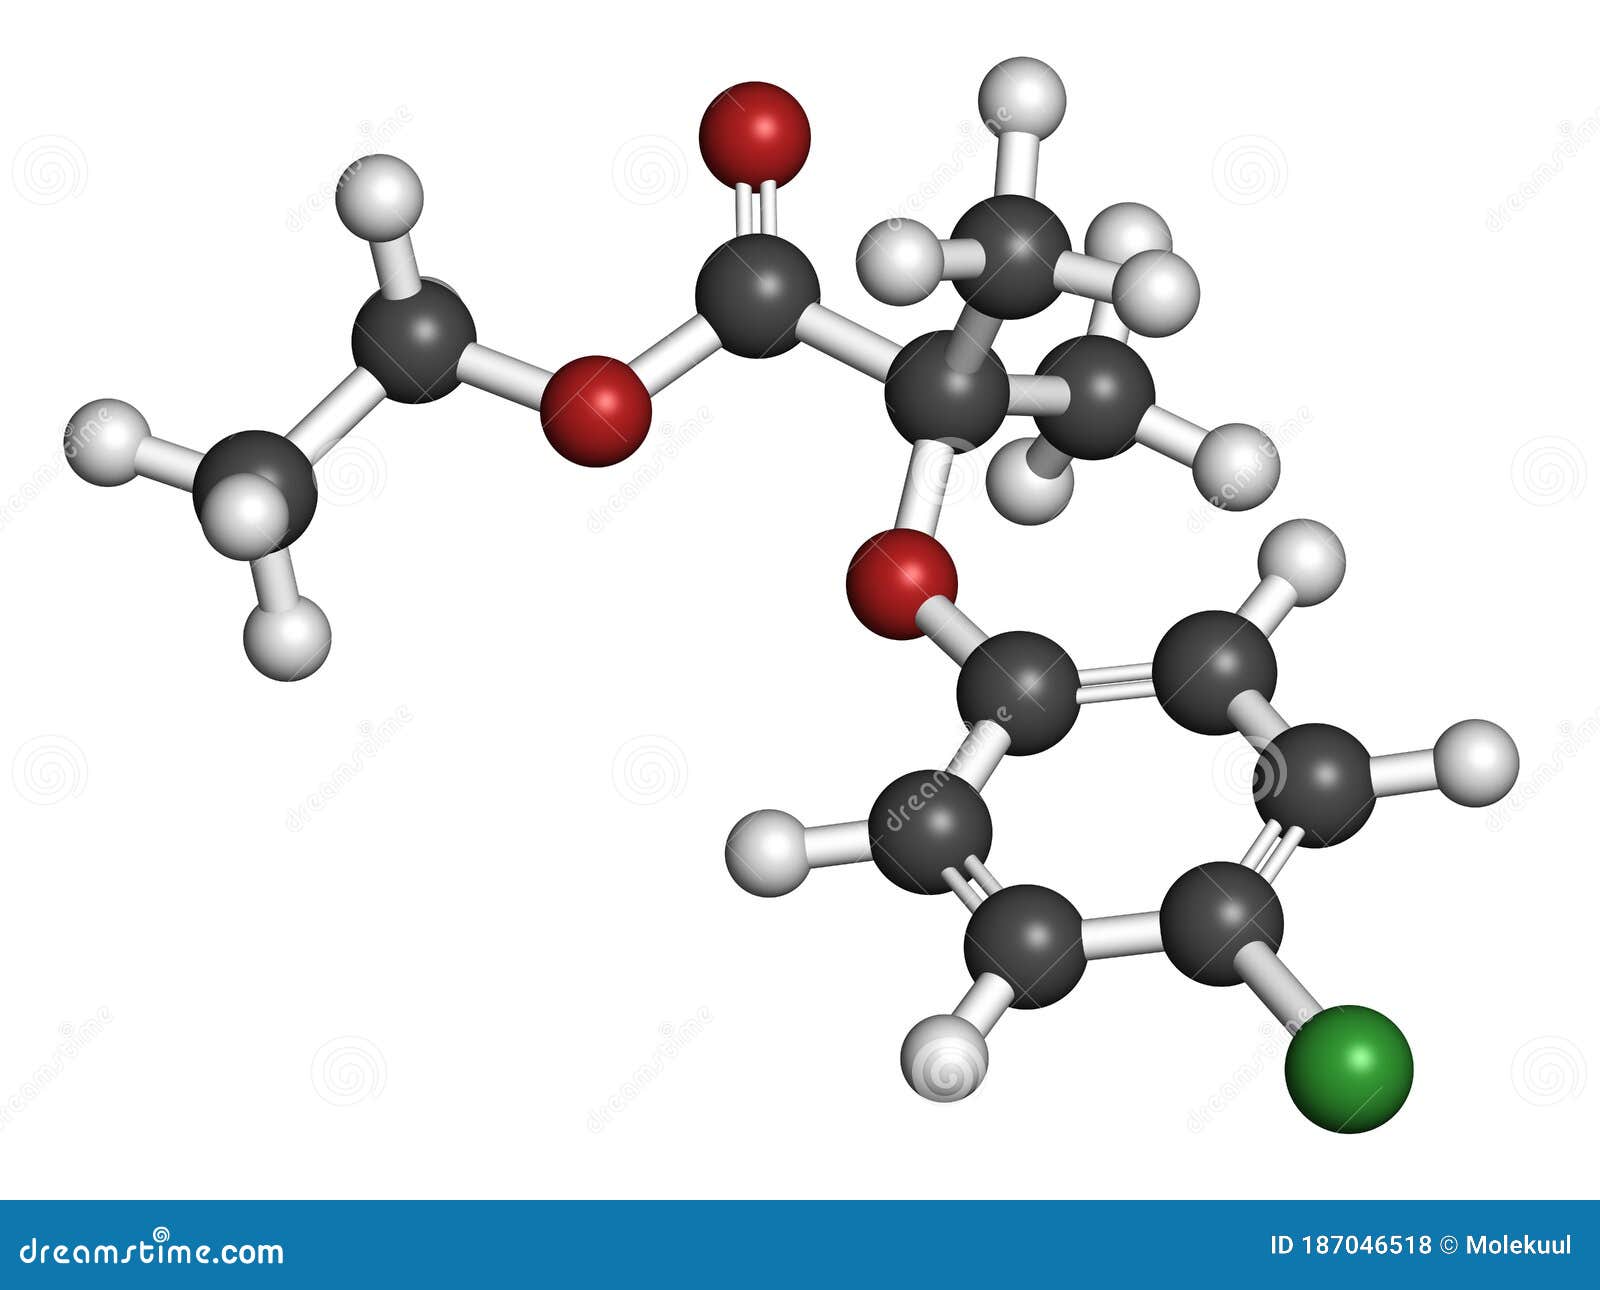 clofibrate hyperlipidemia drug molecule (fibrate class). 3d rendering. atoms are represented as spheres with conventional color